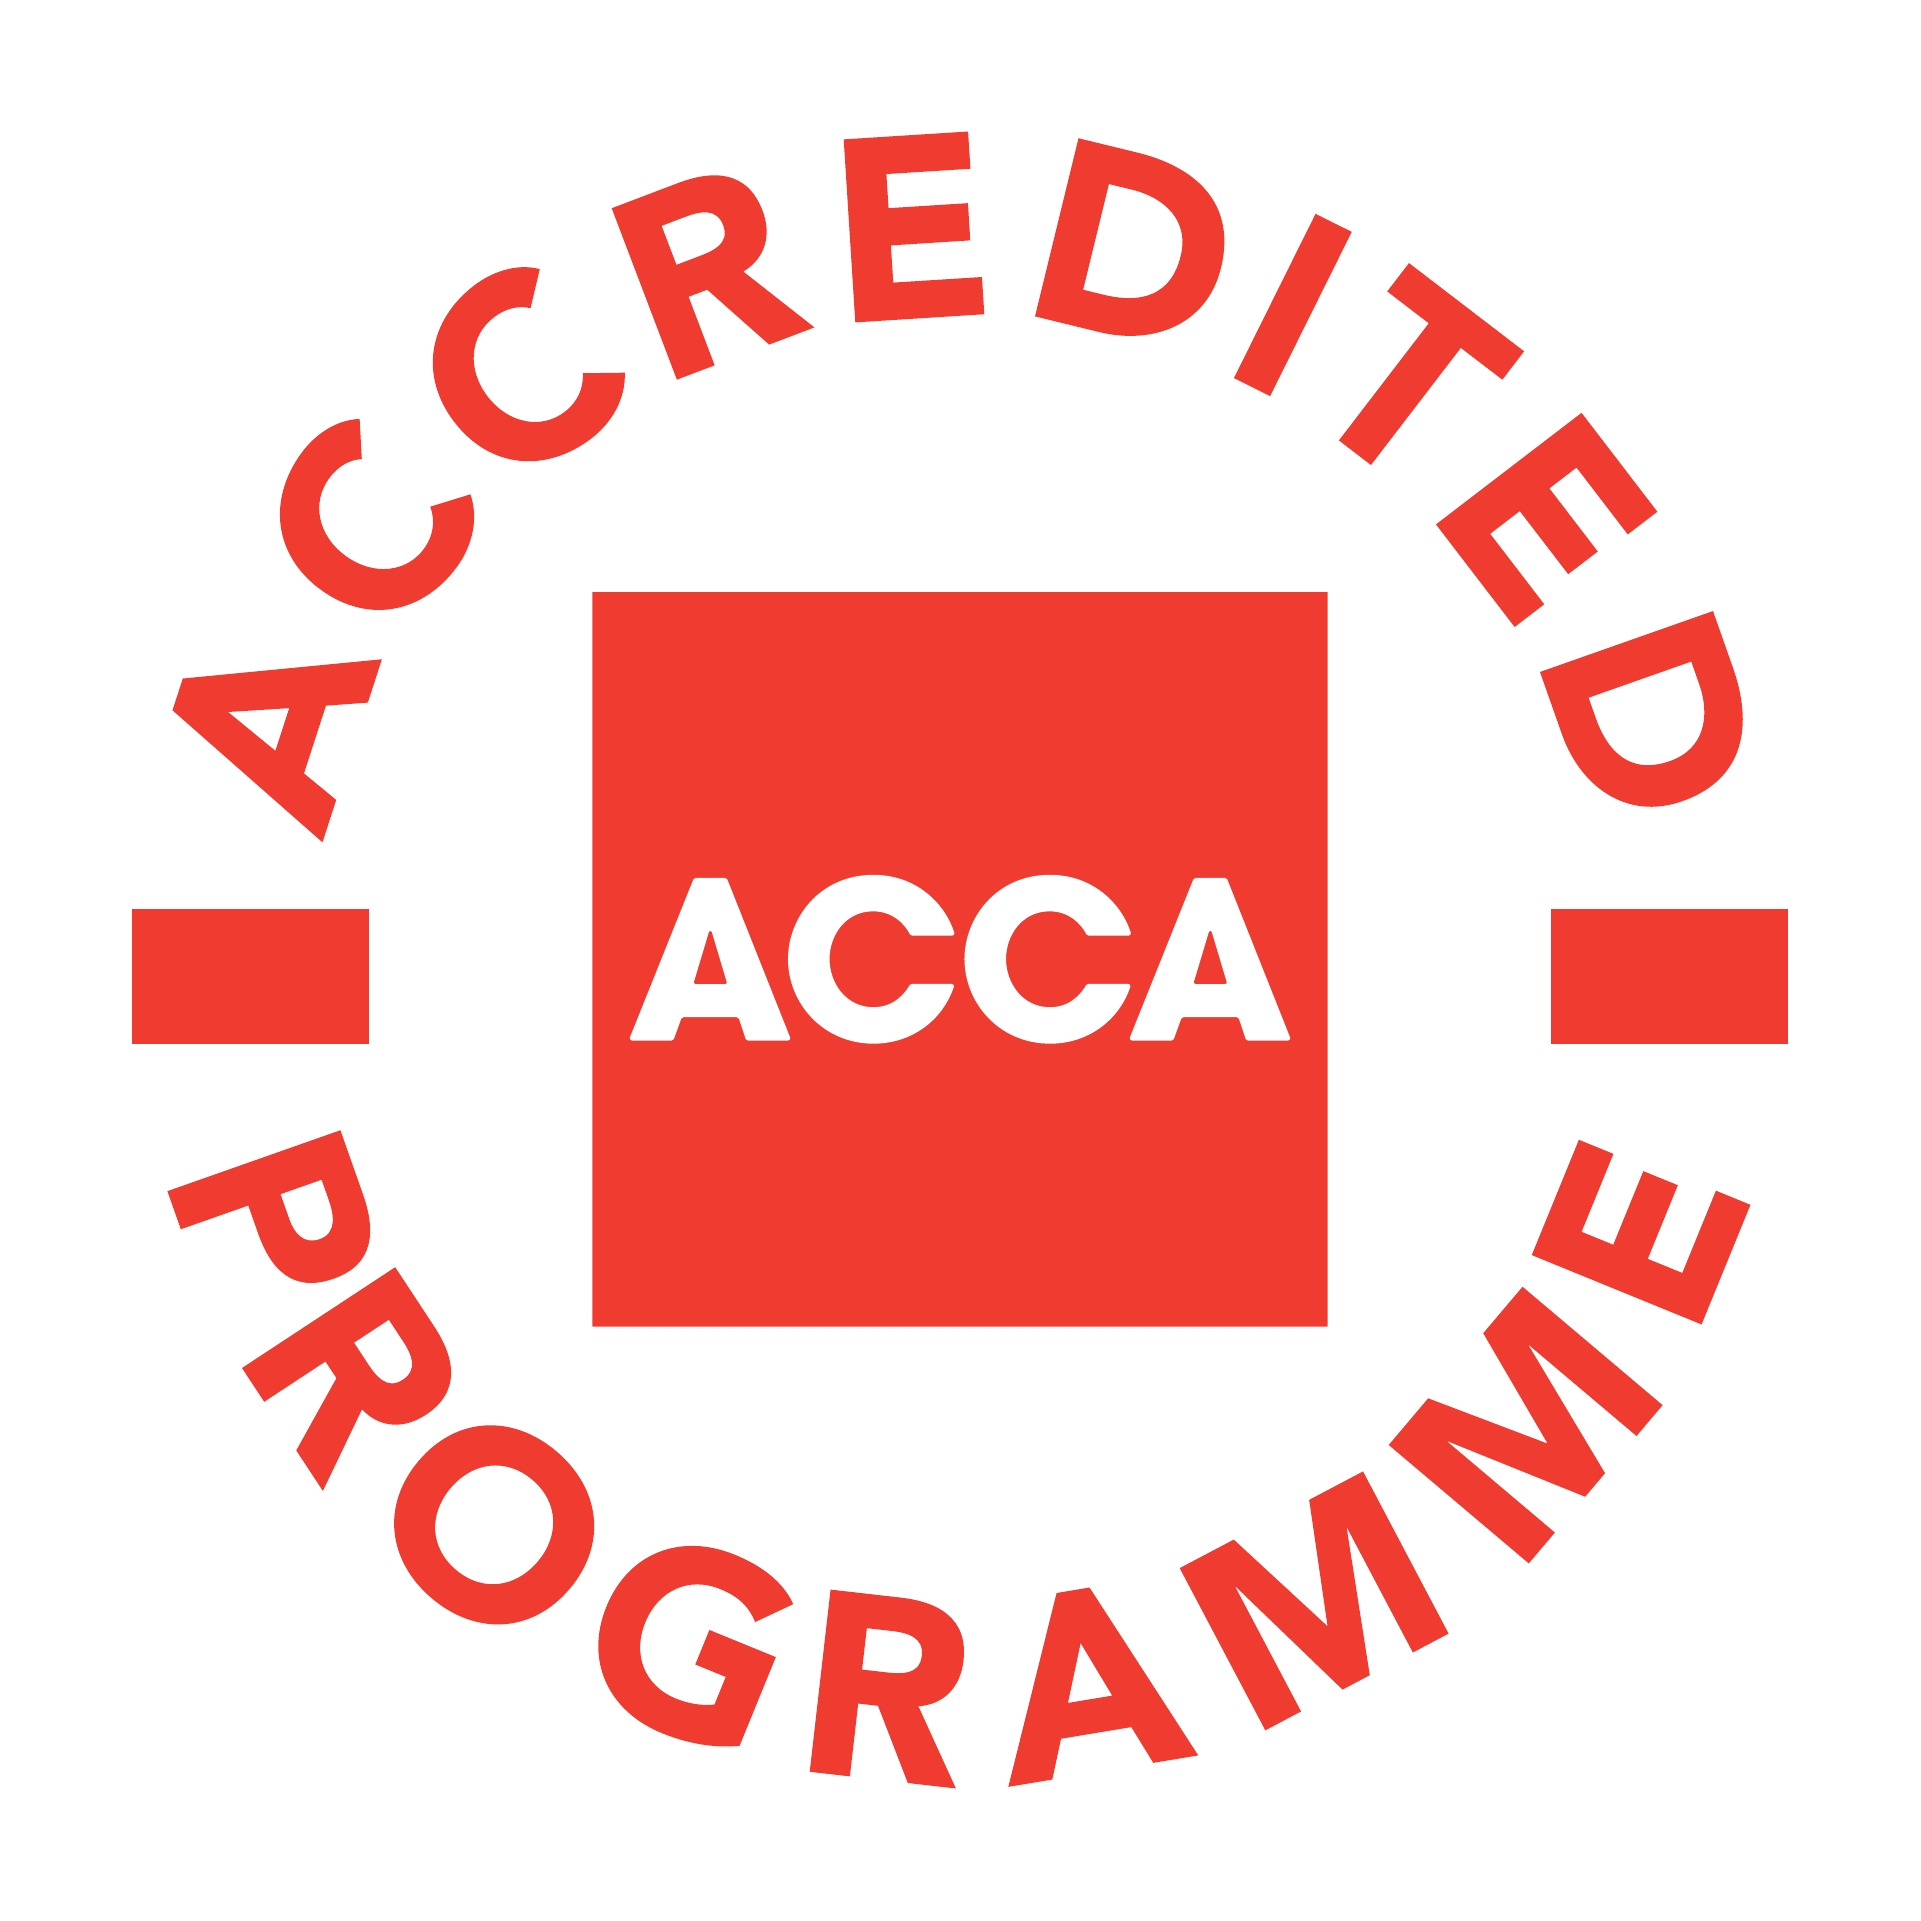 ACCA accredited programme